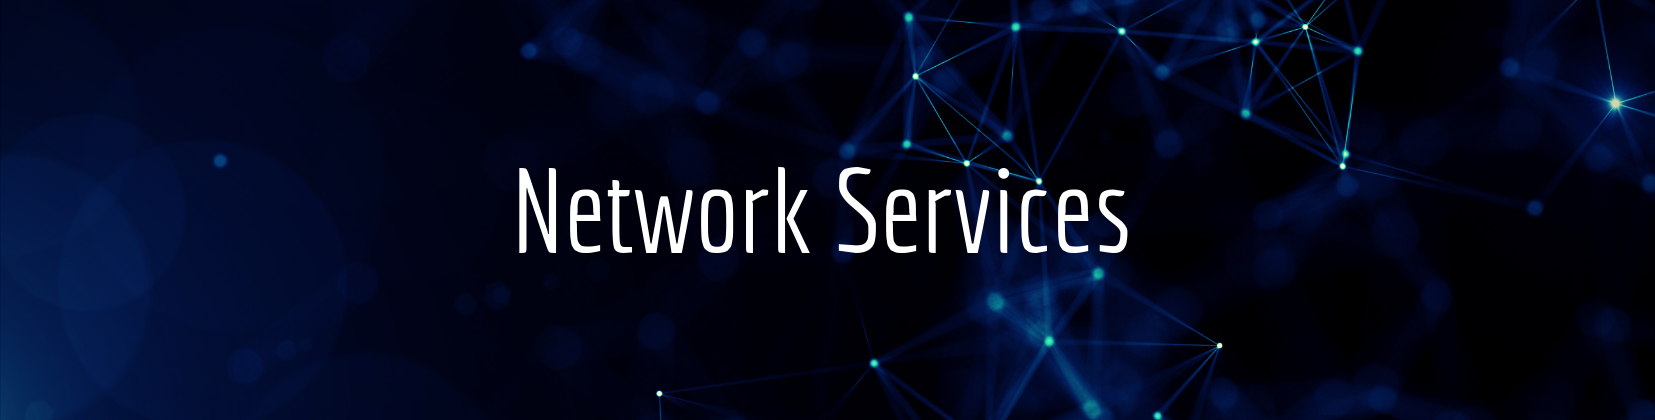 Network Services  Network Services